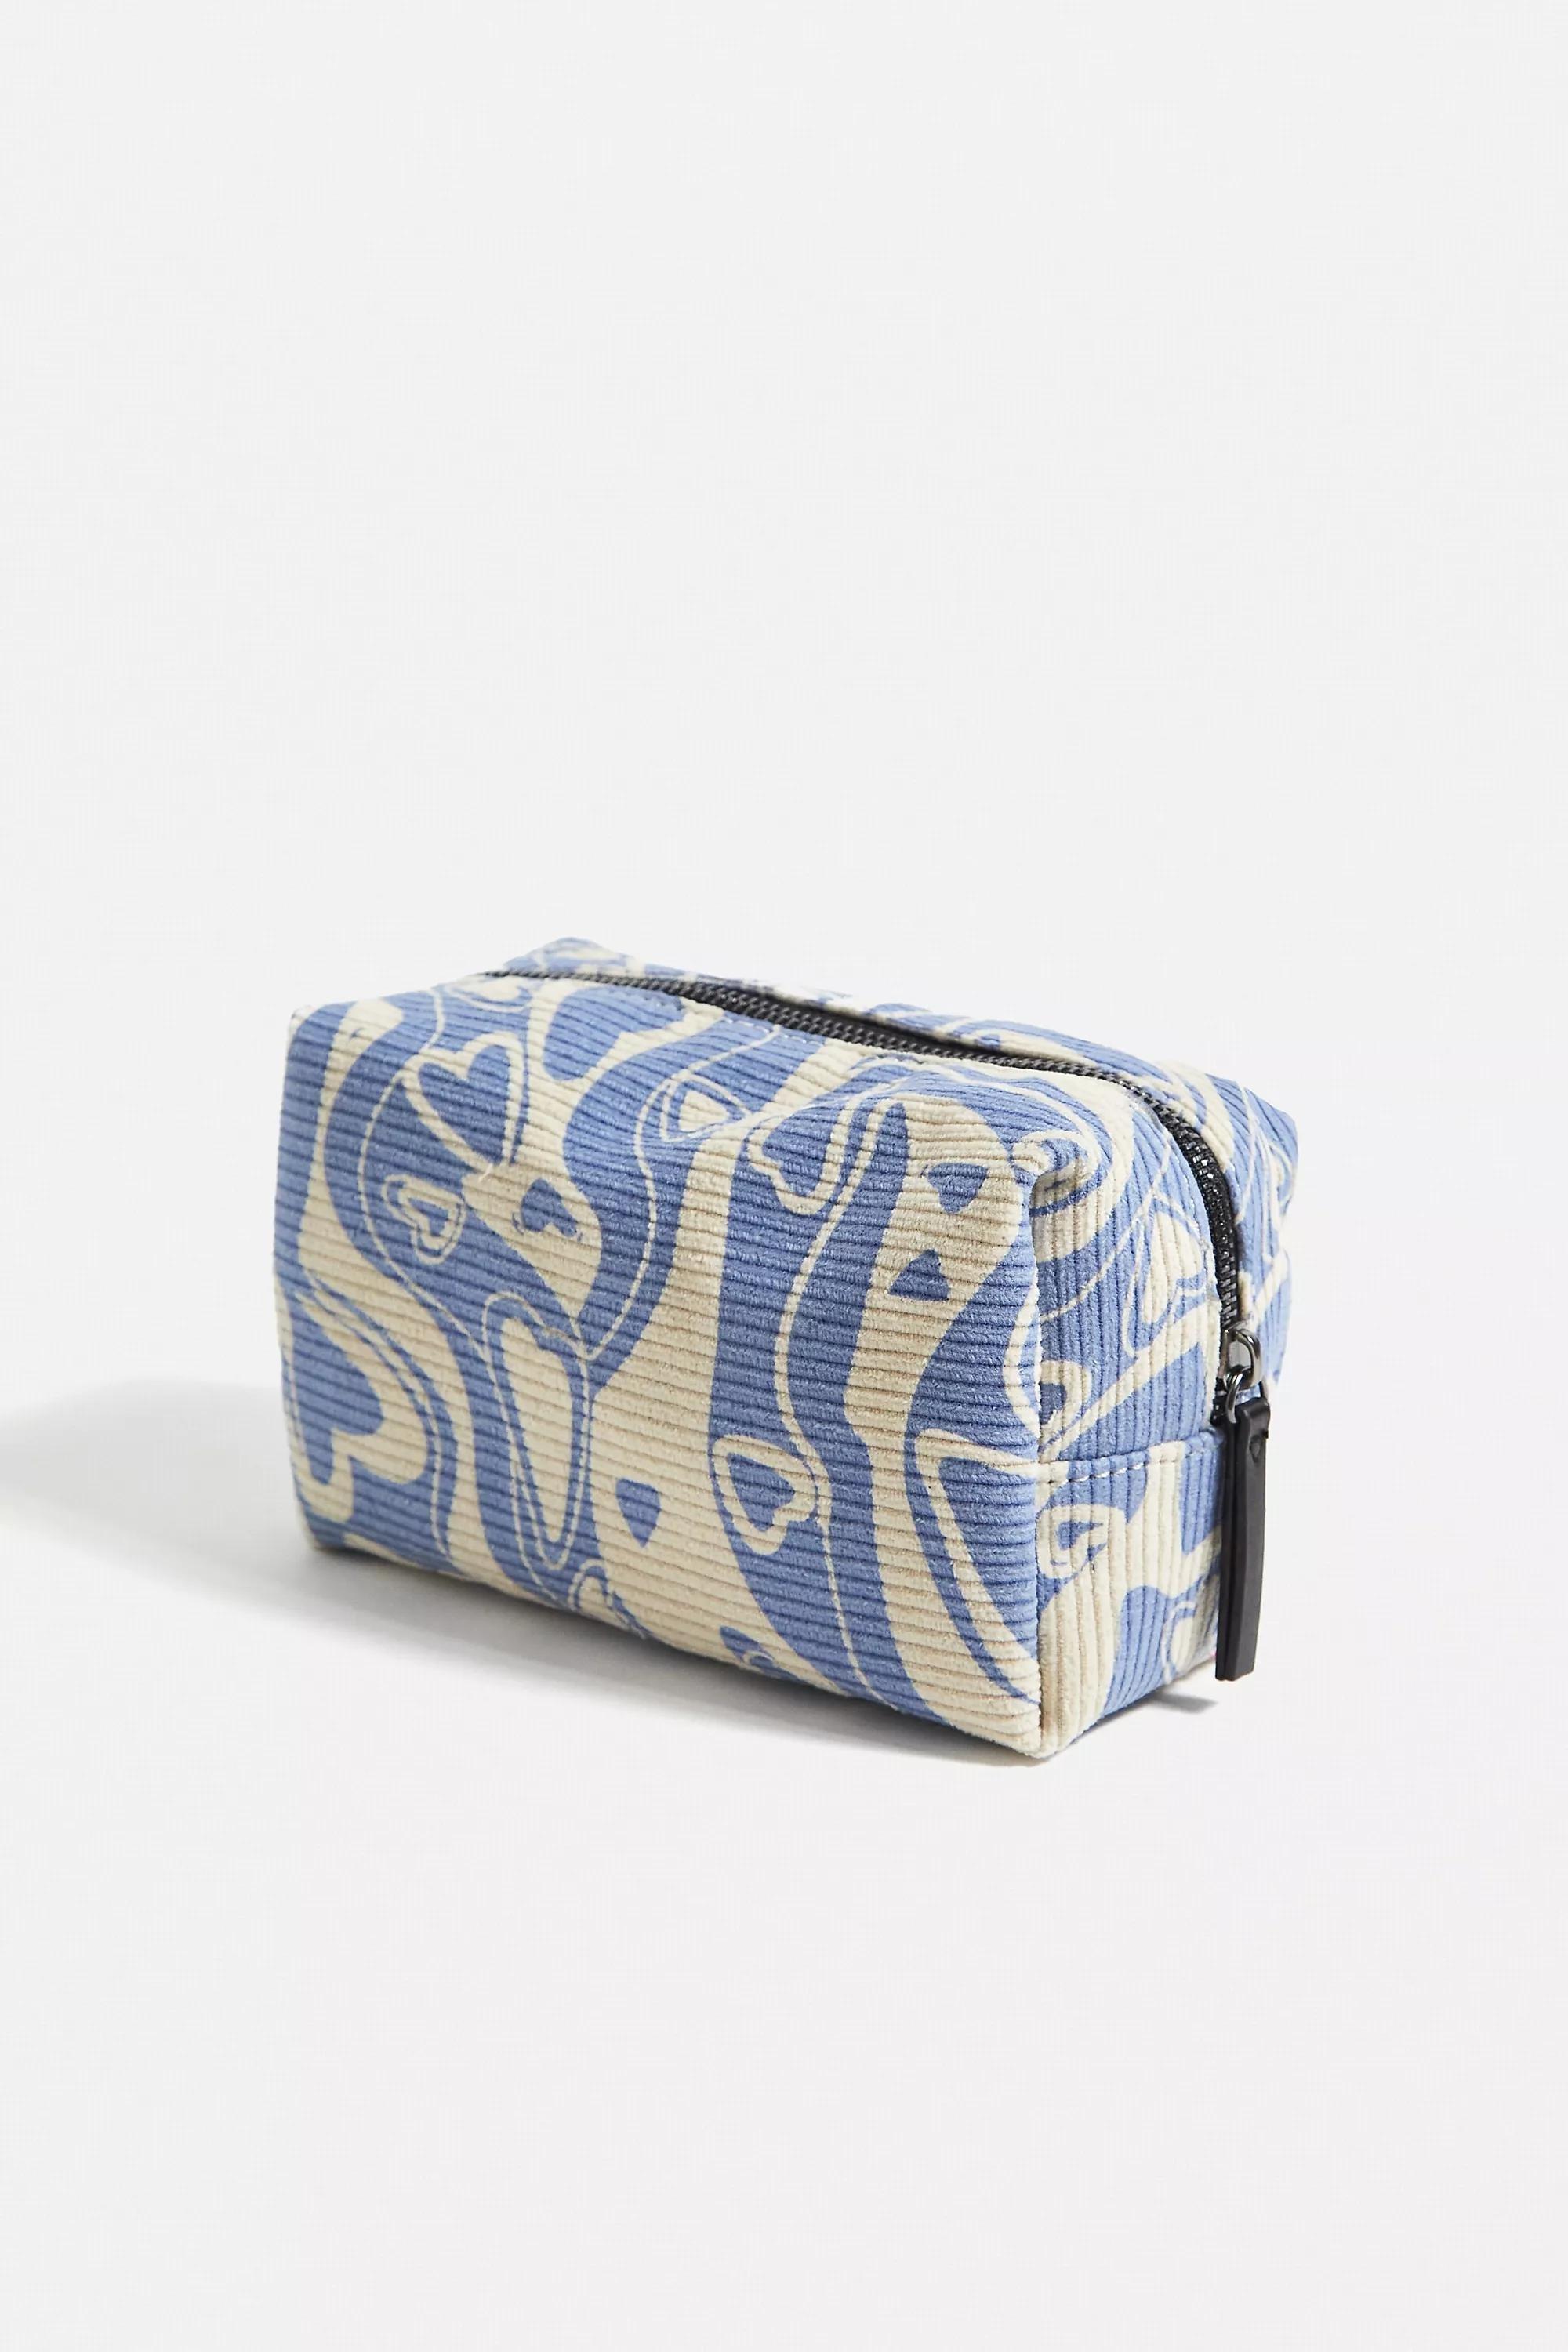 Urban Outfitters - Blue Heart Checkerboard Corduroy Makeup Bag